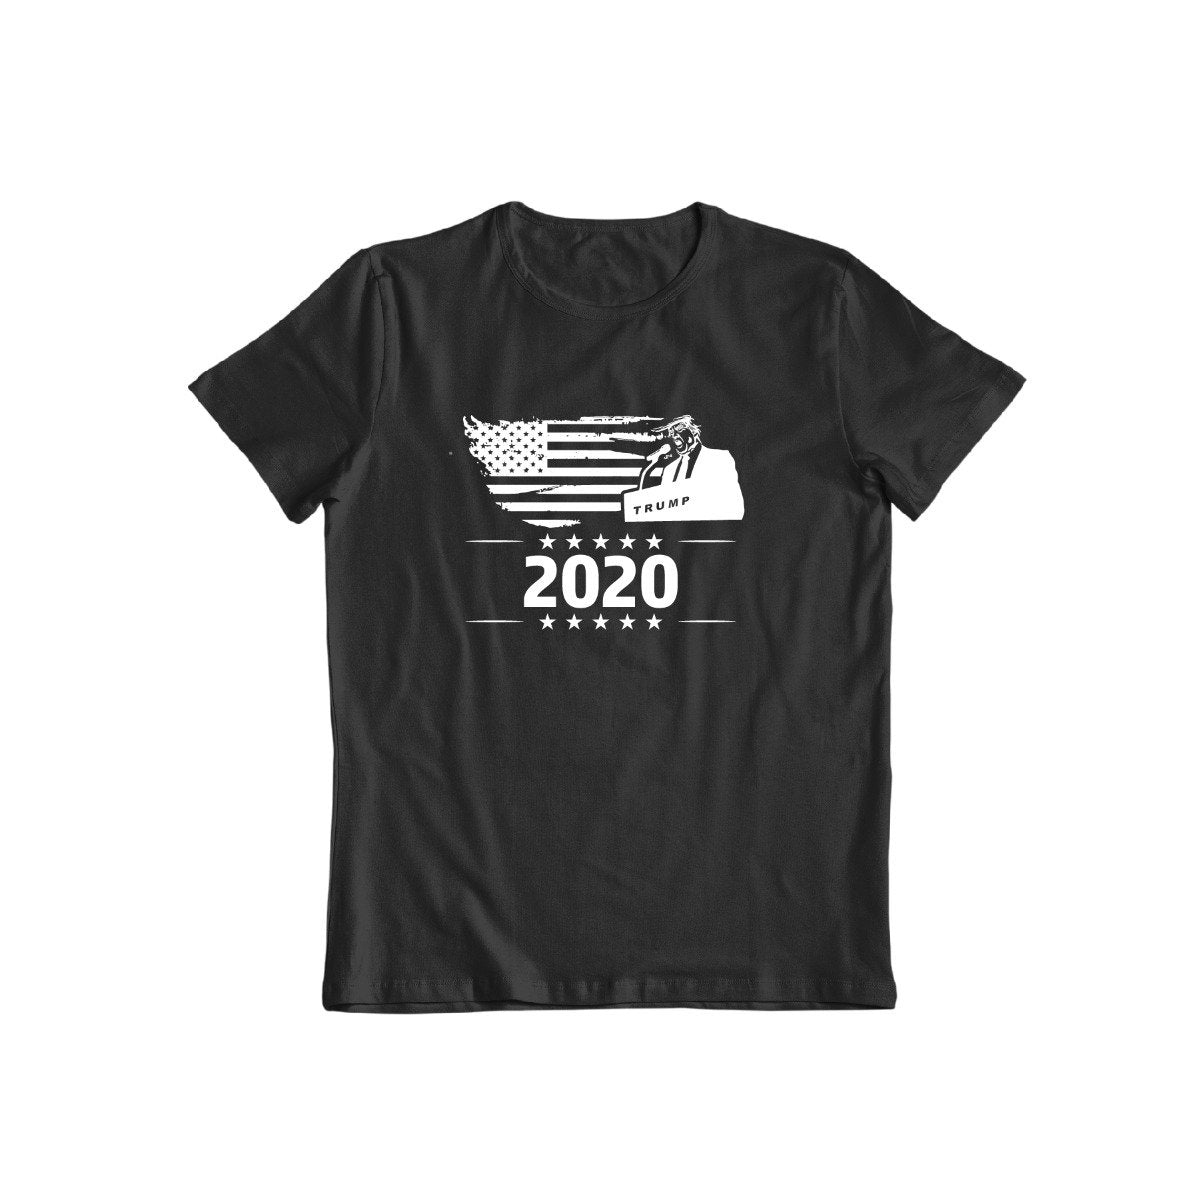 Trump 2020 T-Shirt for Men and Women / Black / Large